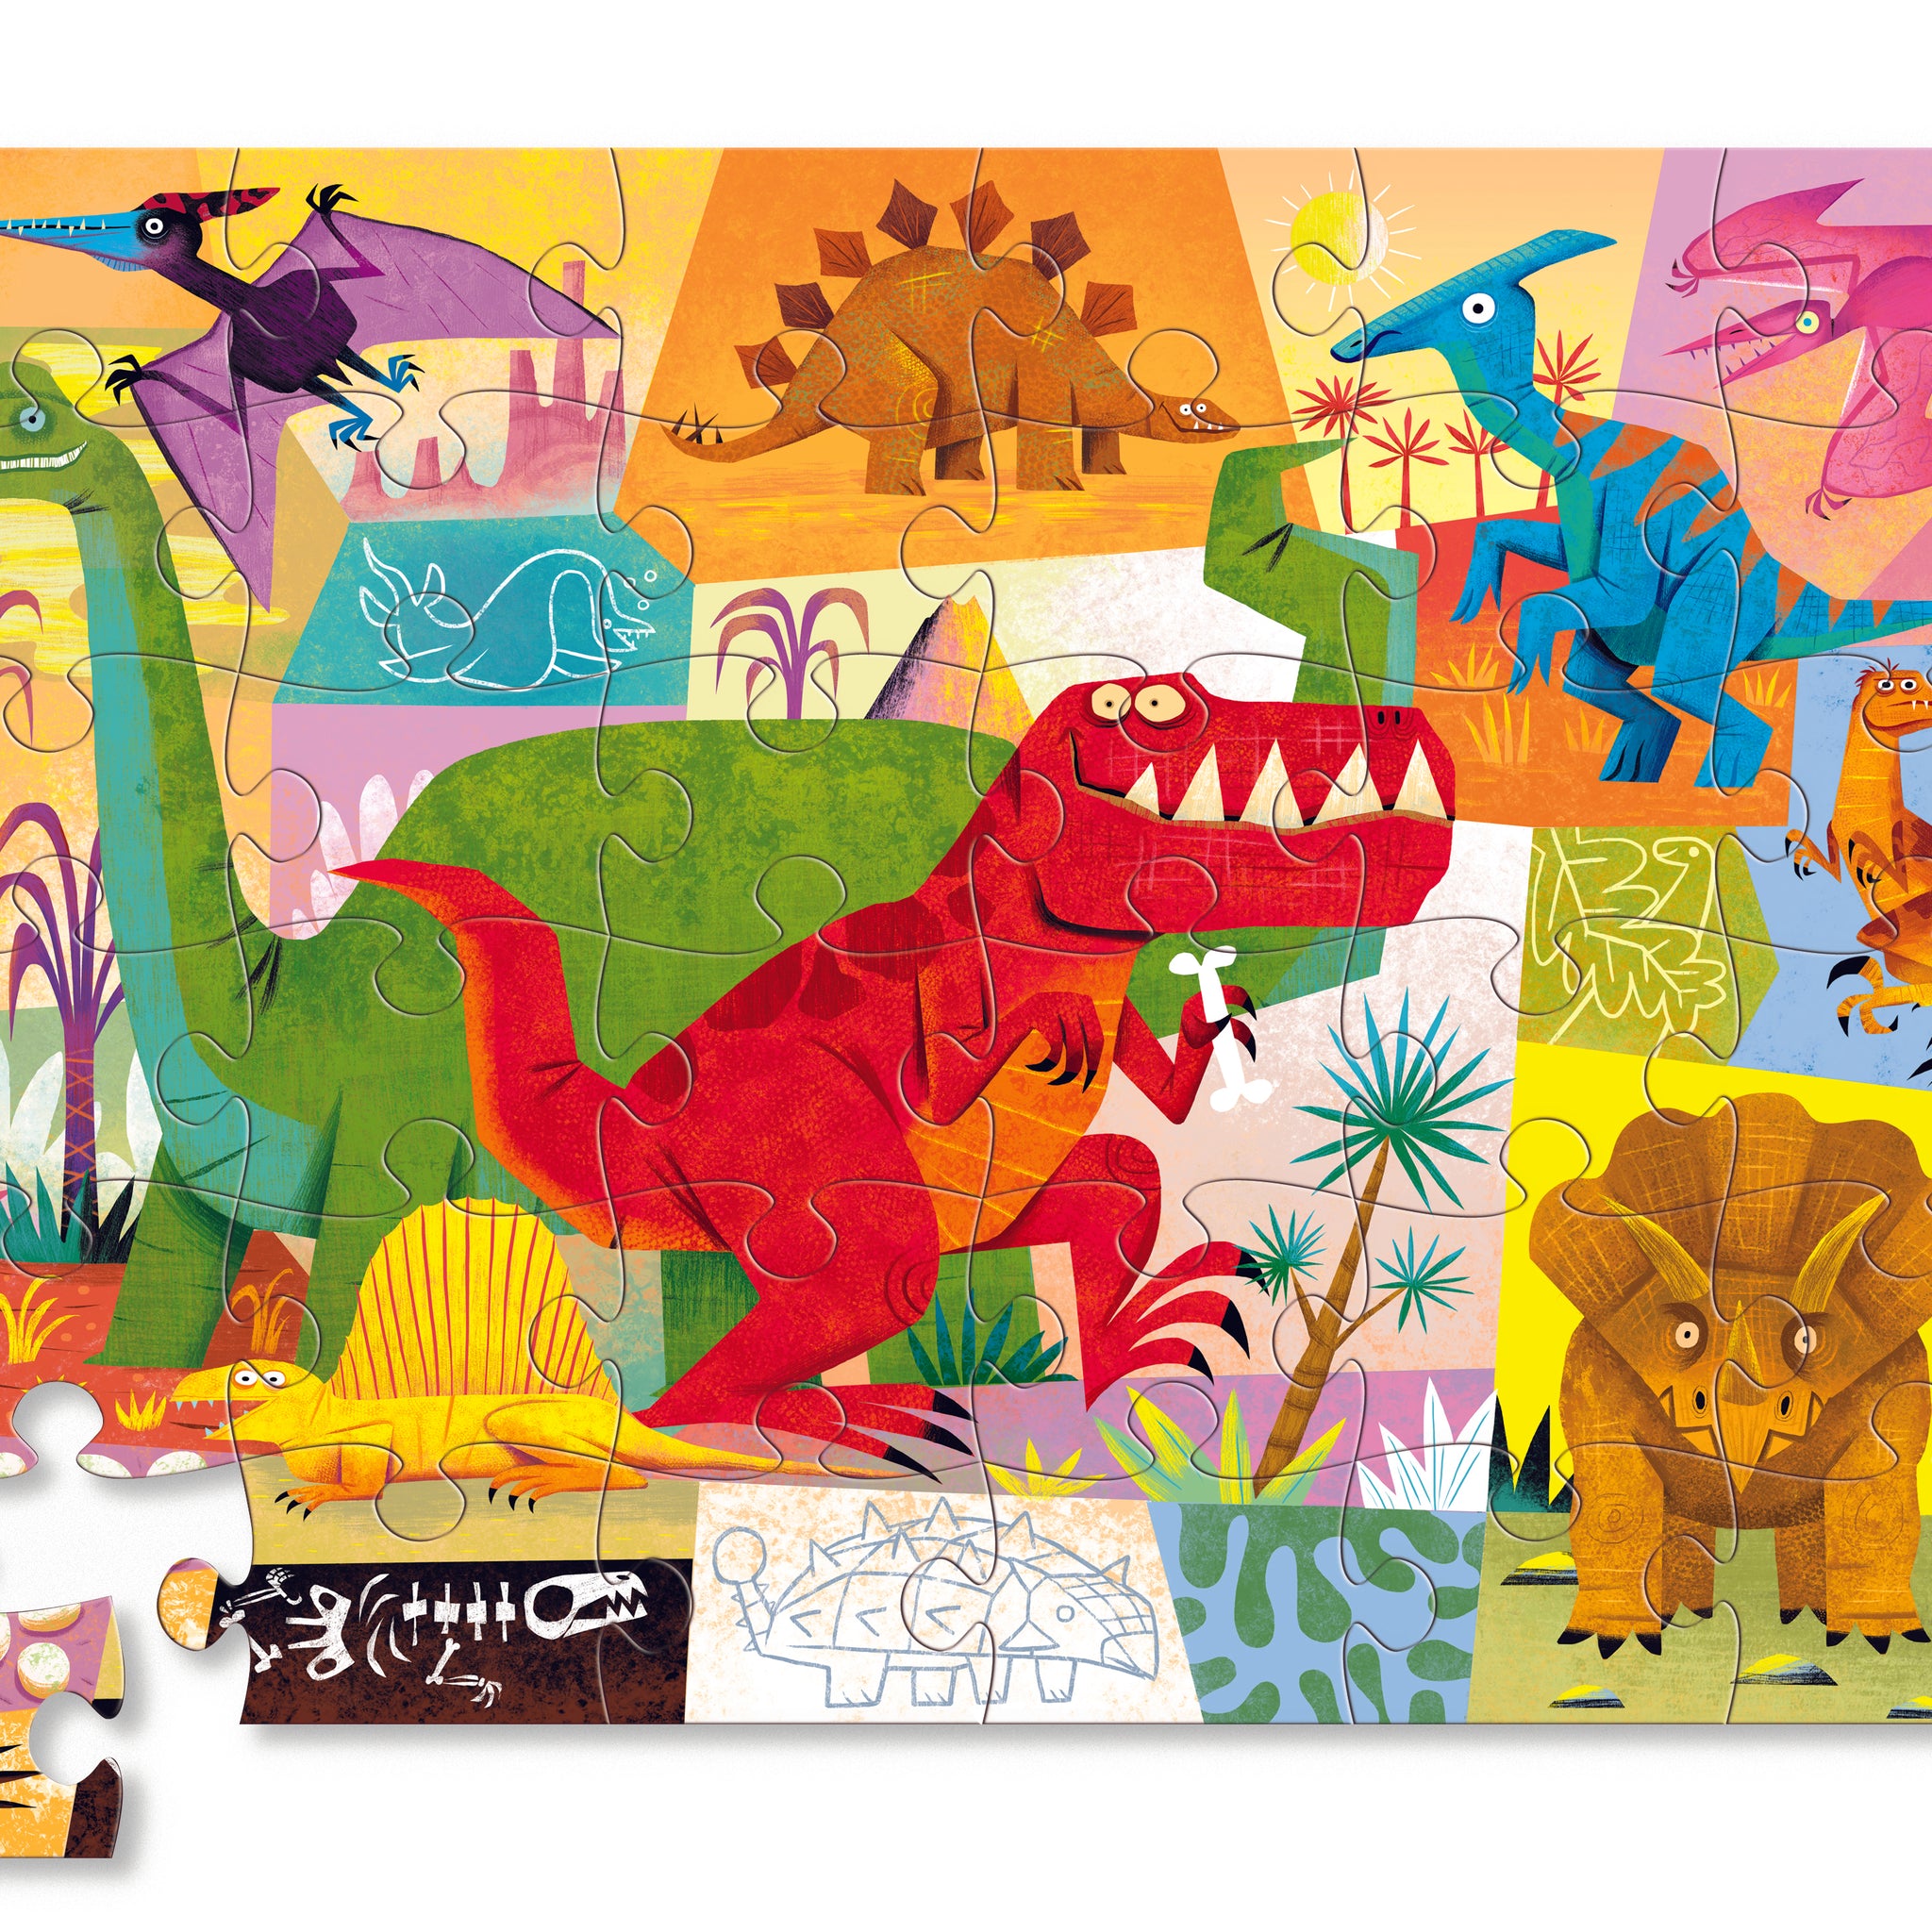 Crocodile Creek SHaped Box Puzzle Dinosaur 36pc quality puzzle for kids eco friendly The Toy Wagon